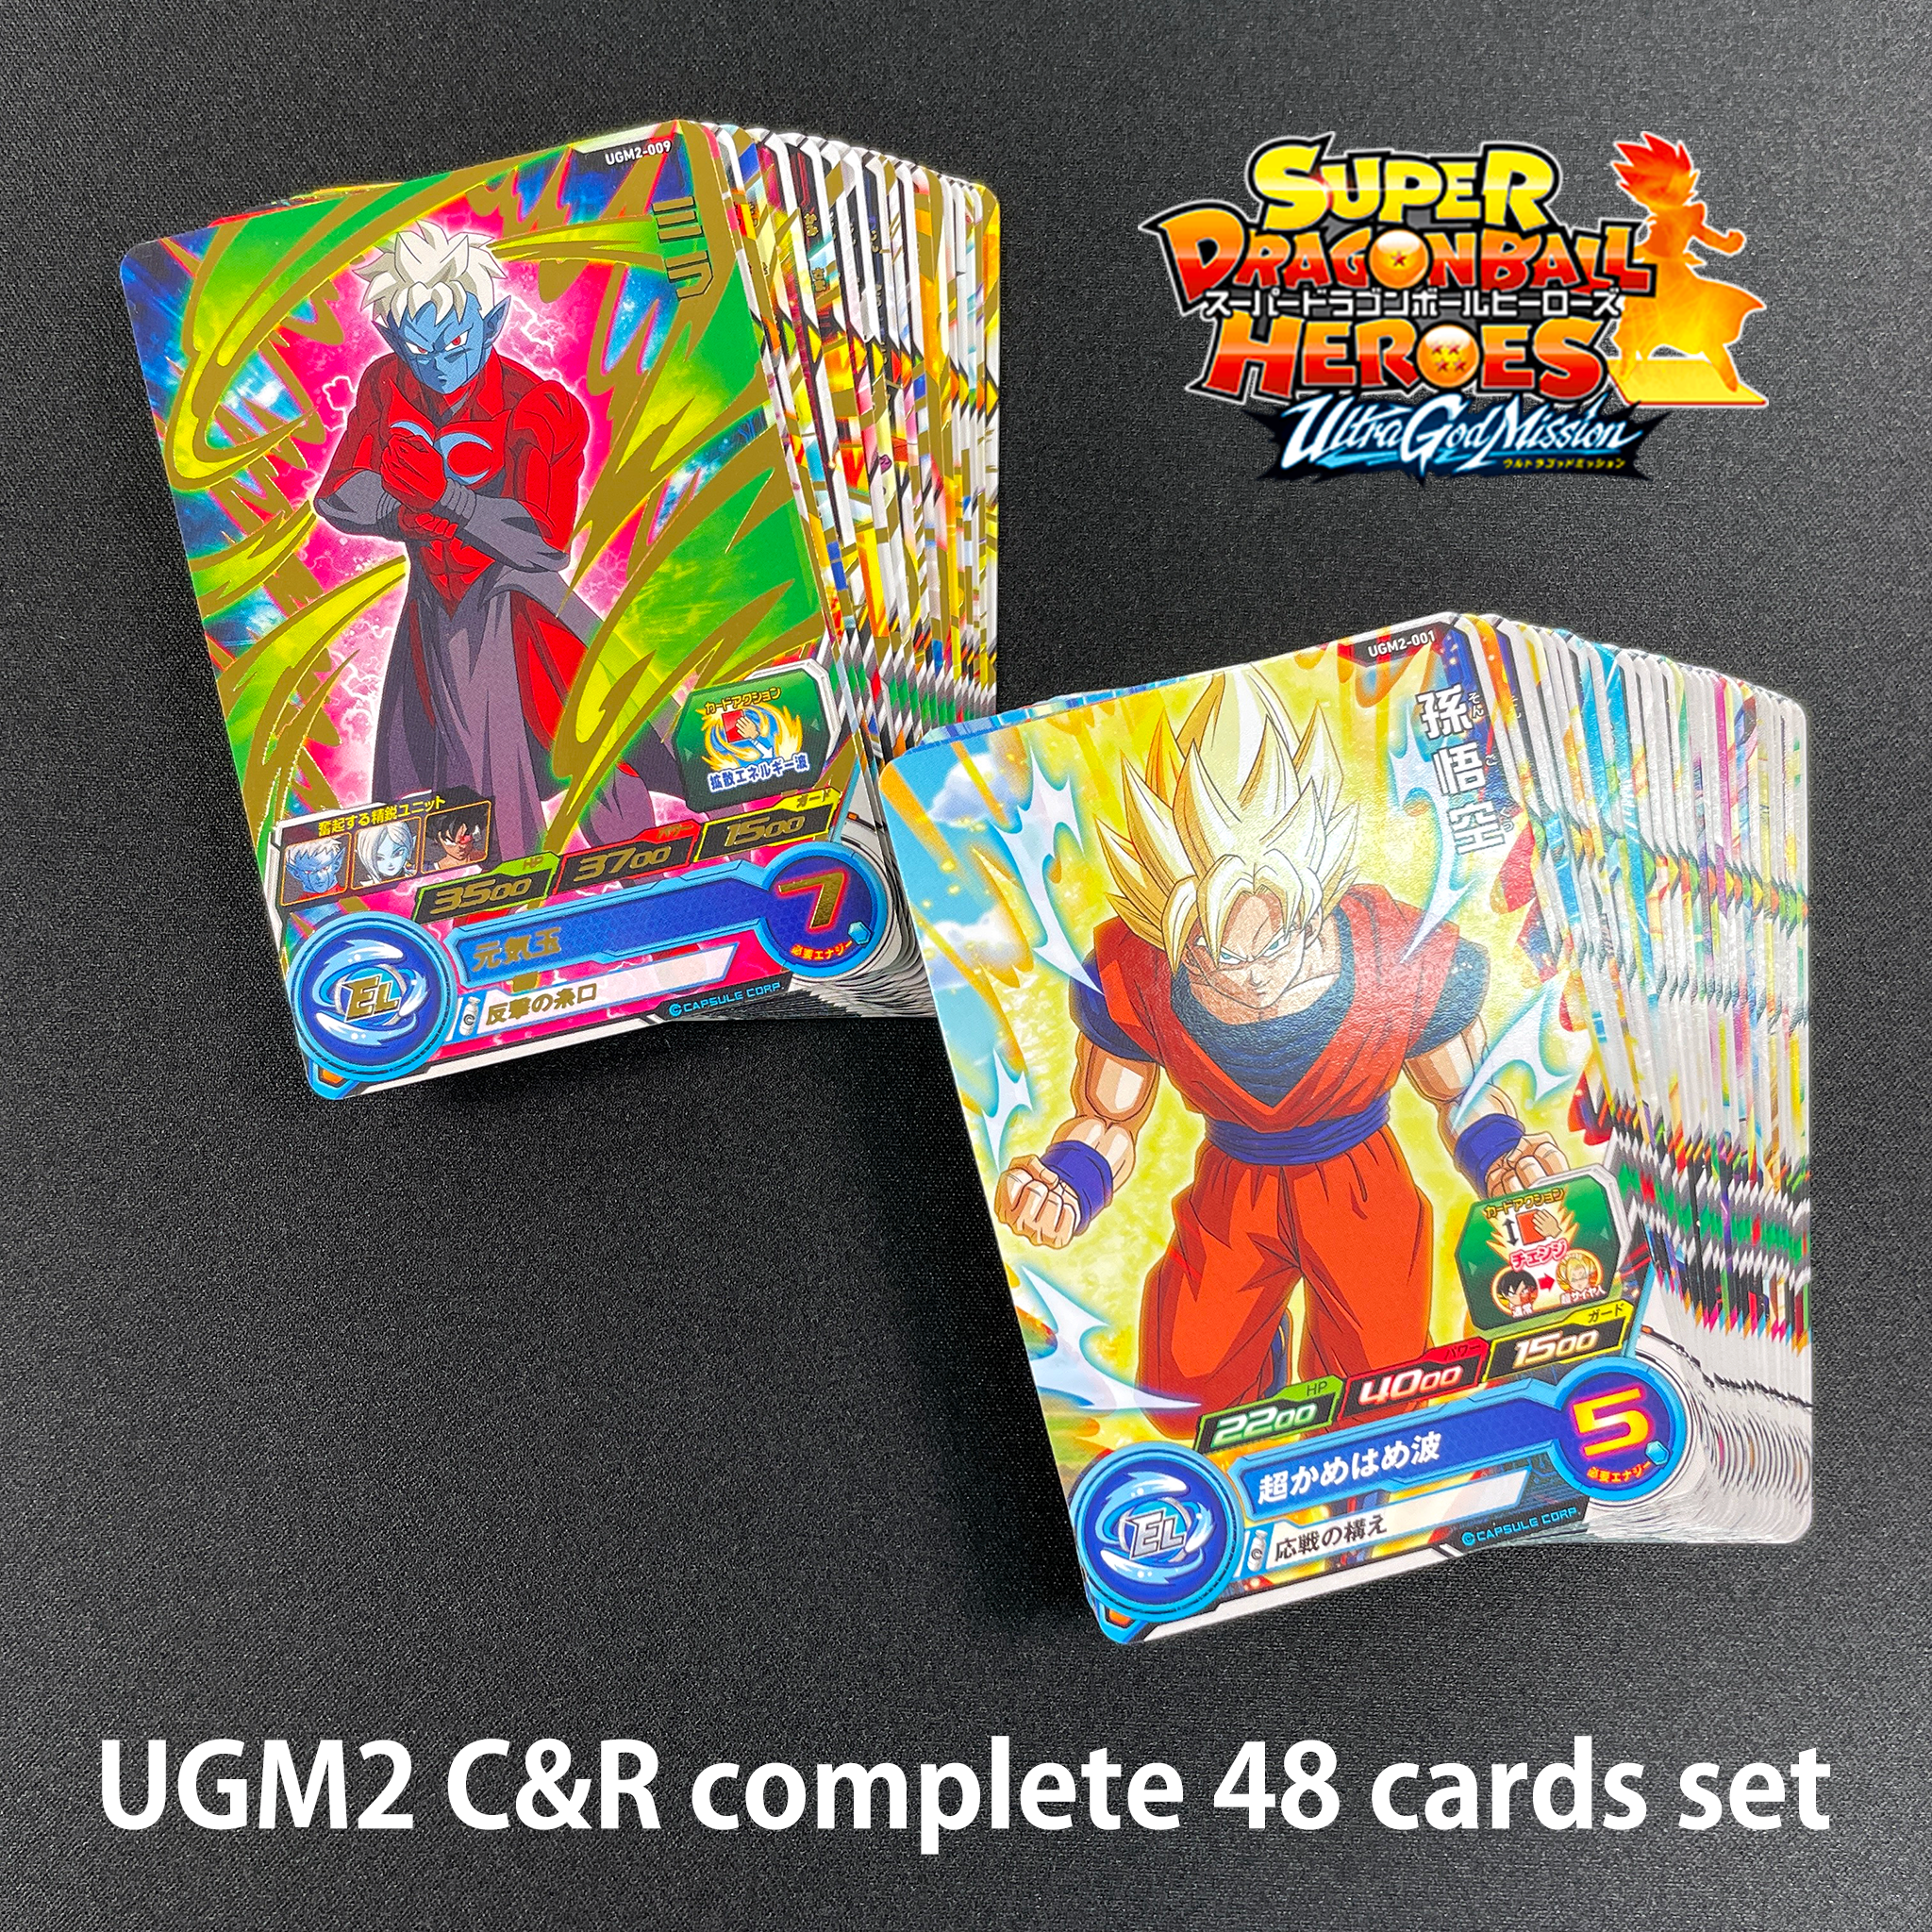 SUPER DRAGON BALL HEROES ULTRA GOD MISSION 2 UGM1 C&R complete 48 cards set      30 Common cards     18 Rare cards